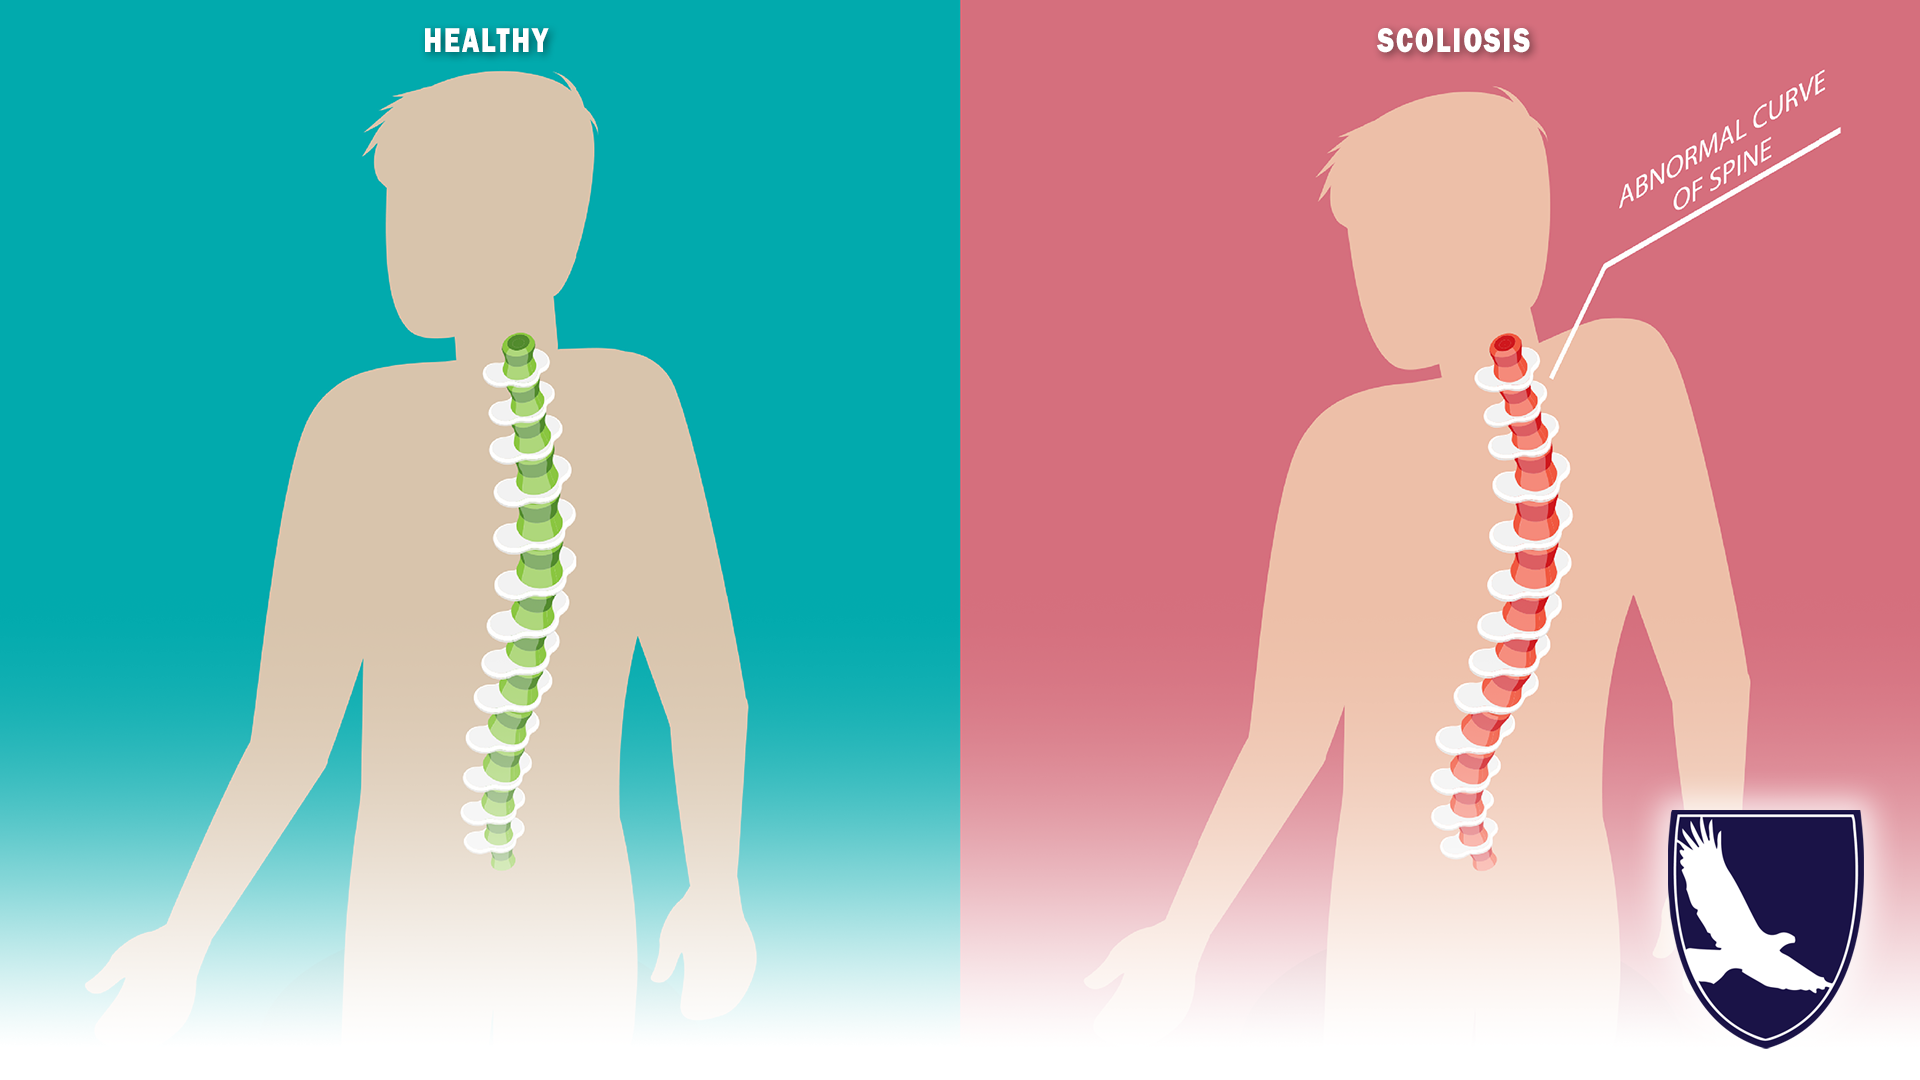 CAN I GET SOCIAL SECURITY DISABILITY IF I HAVE SCOLIOSIS